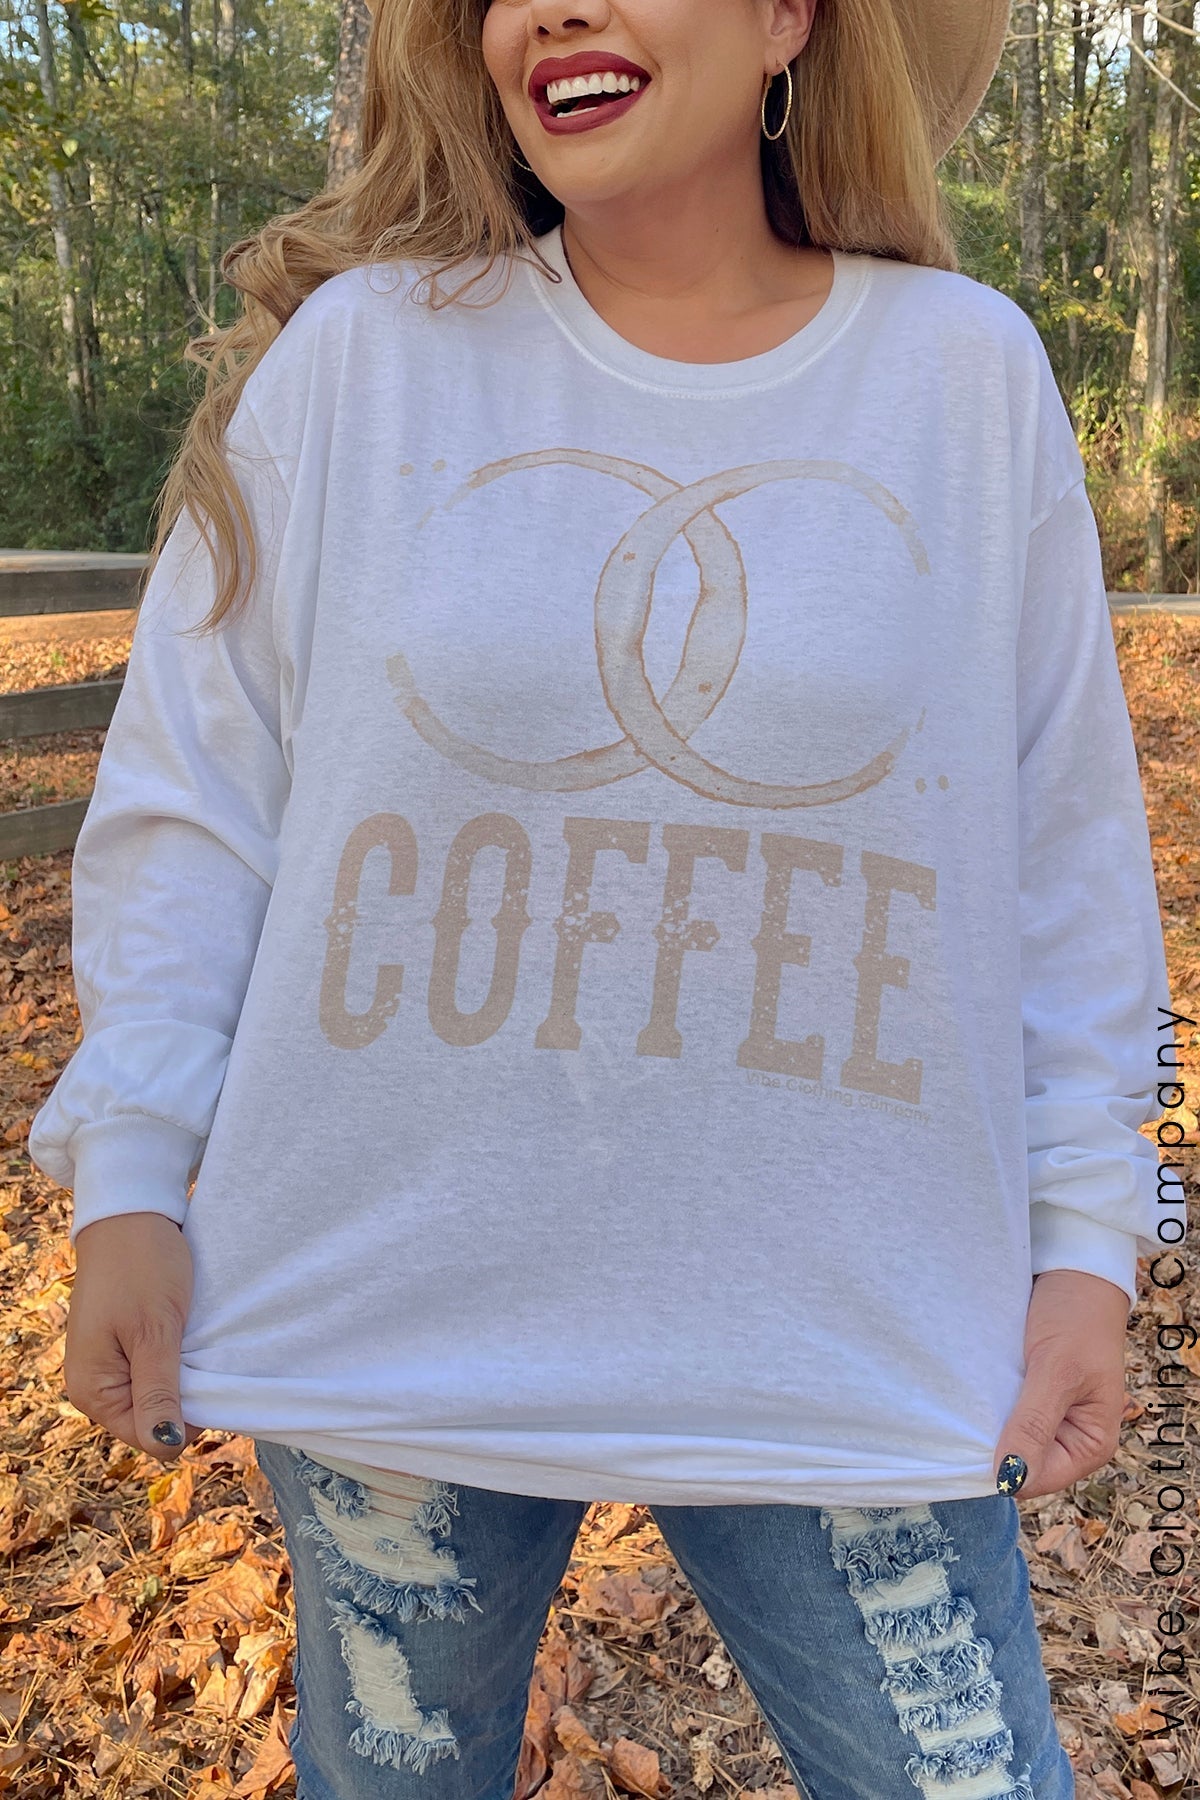 Coffee Couture Graphic Tee graphic tees Mark tee 